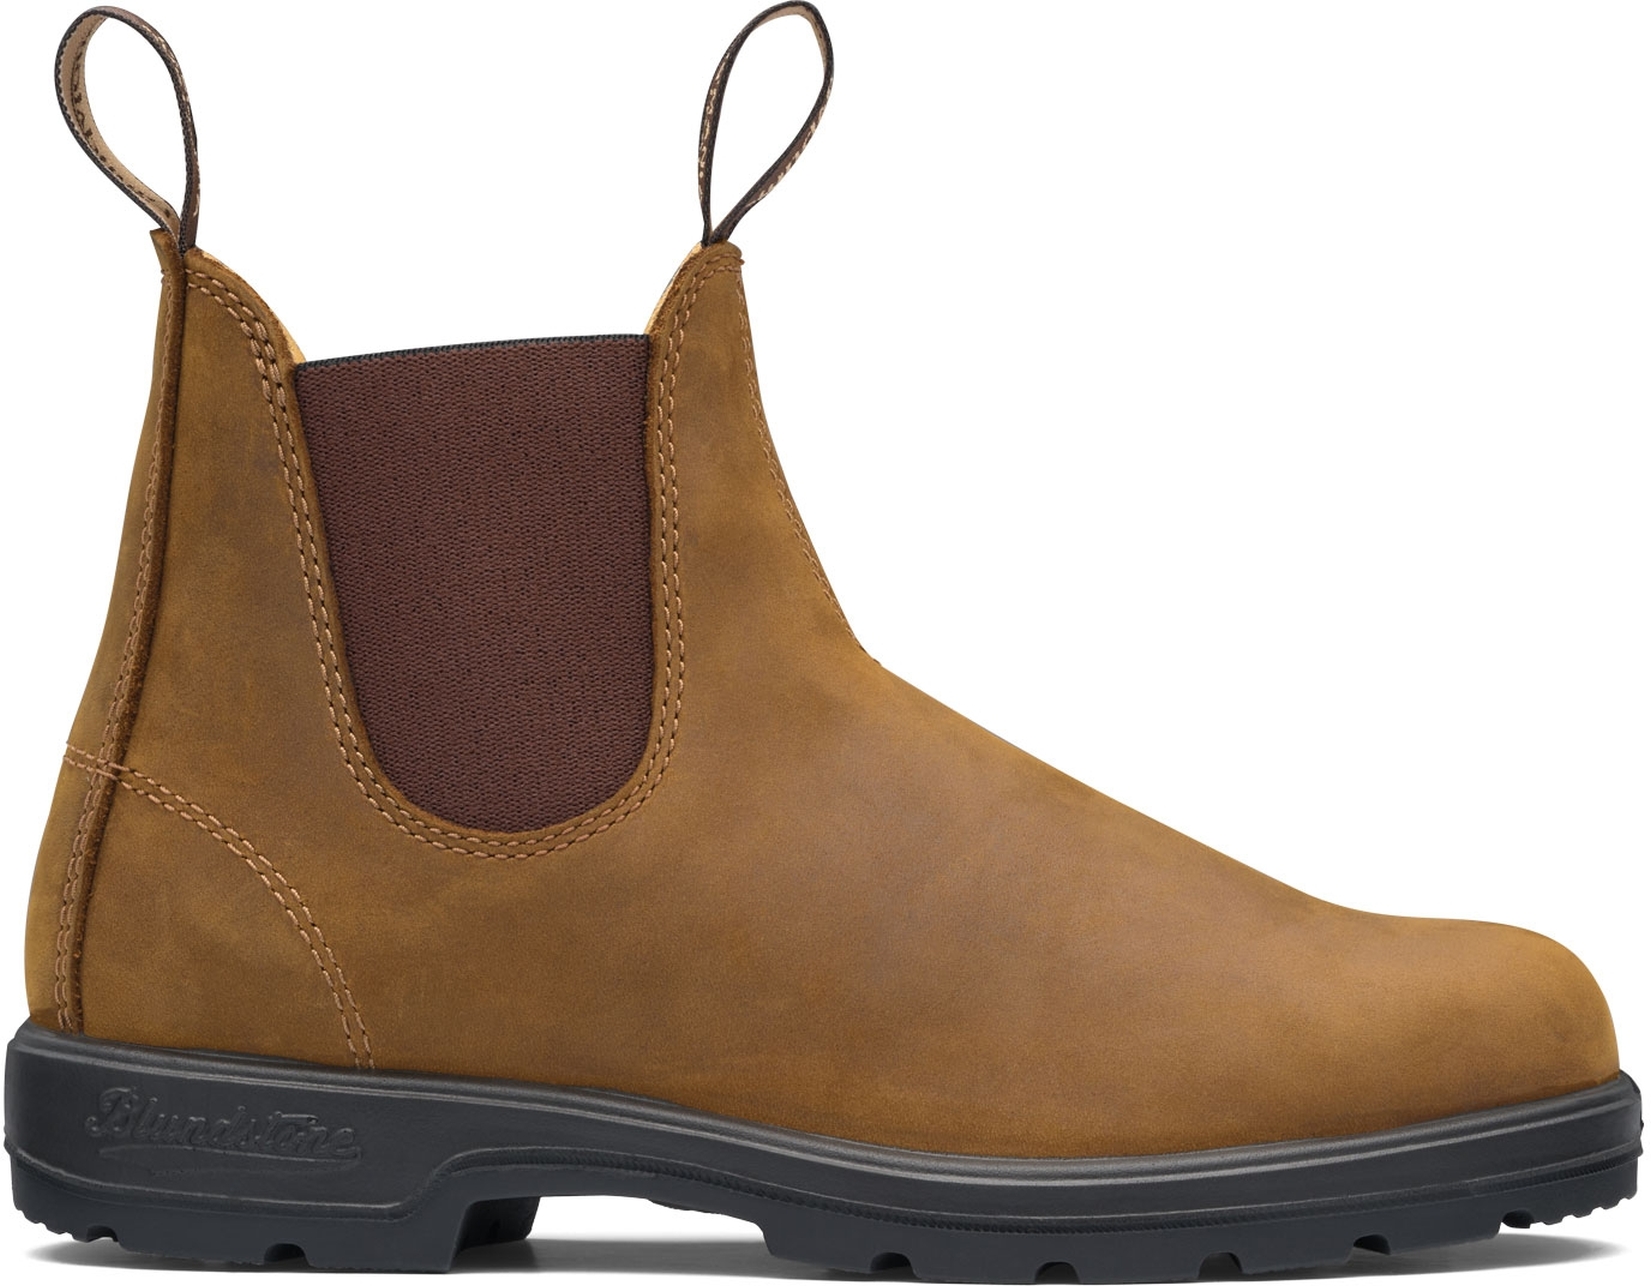 Blundstone Blundstone 562 Crazy Horse Leather (550 Series) Calf leather